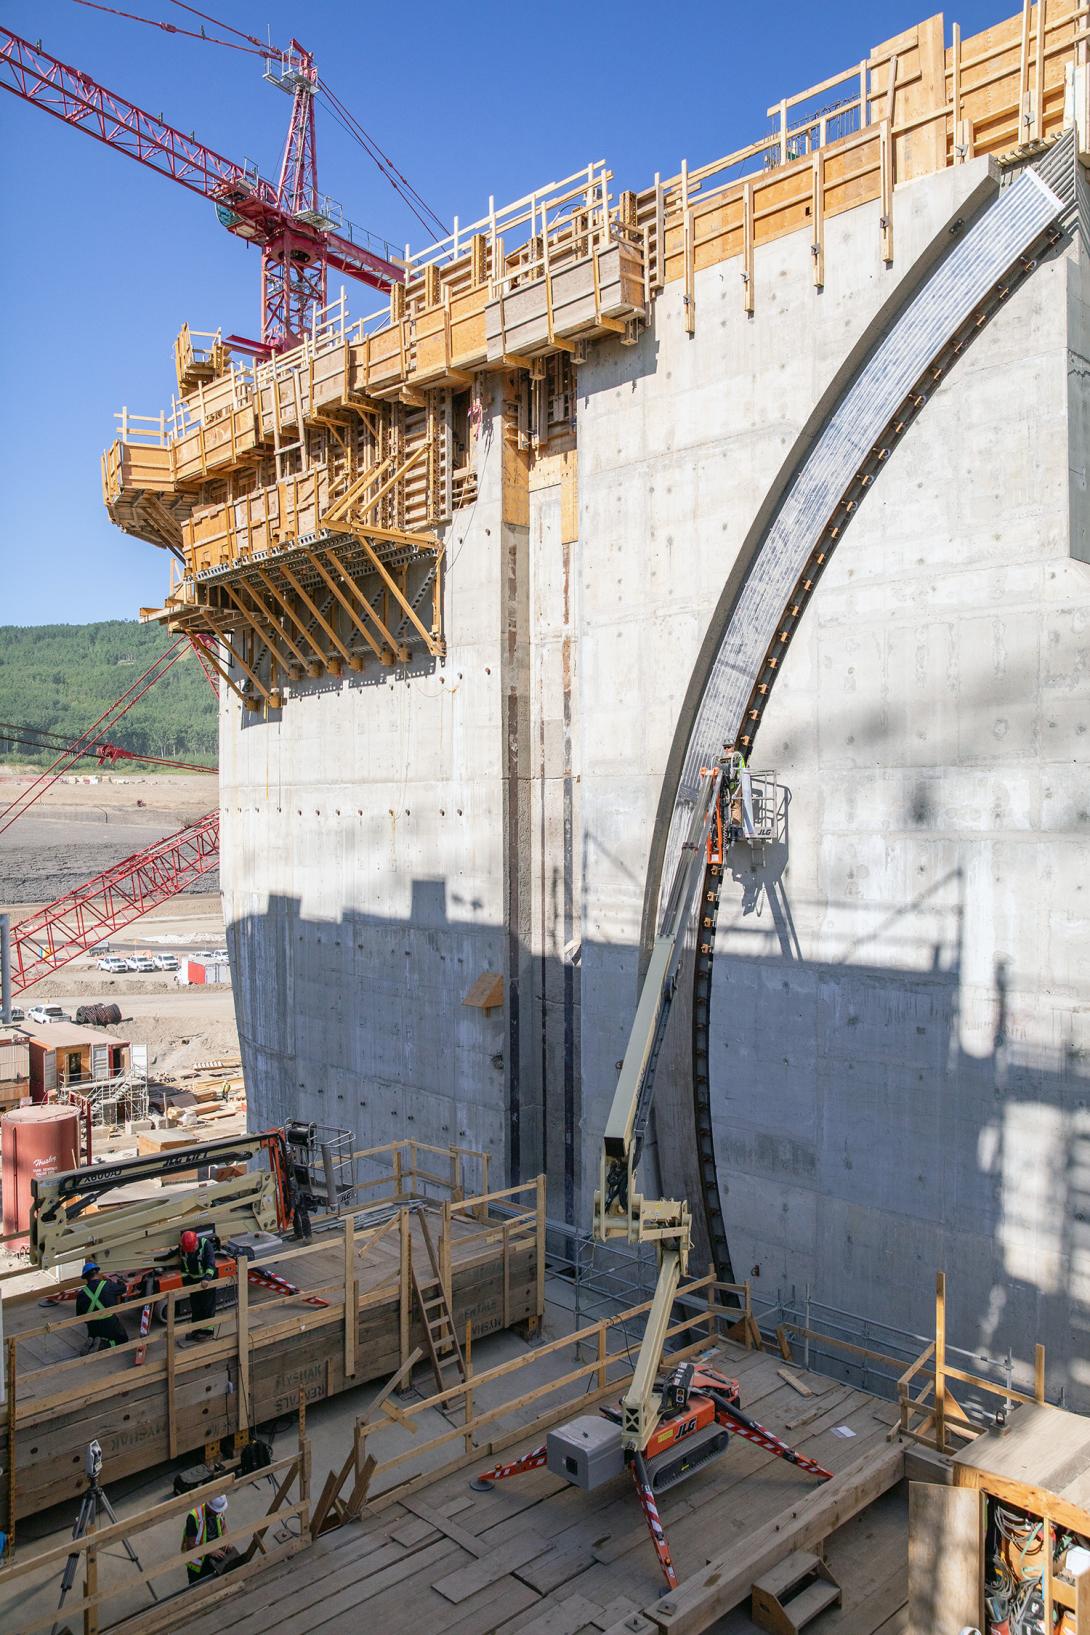 Spillway radial operating gate and guide installation. | July 2022